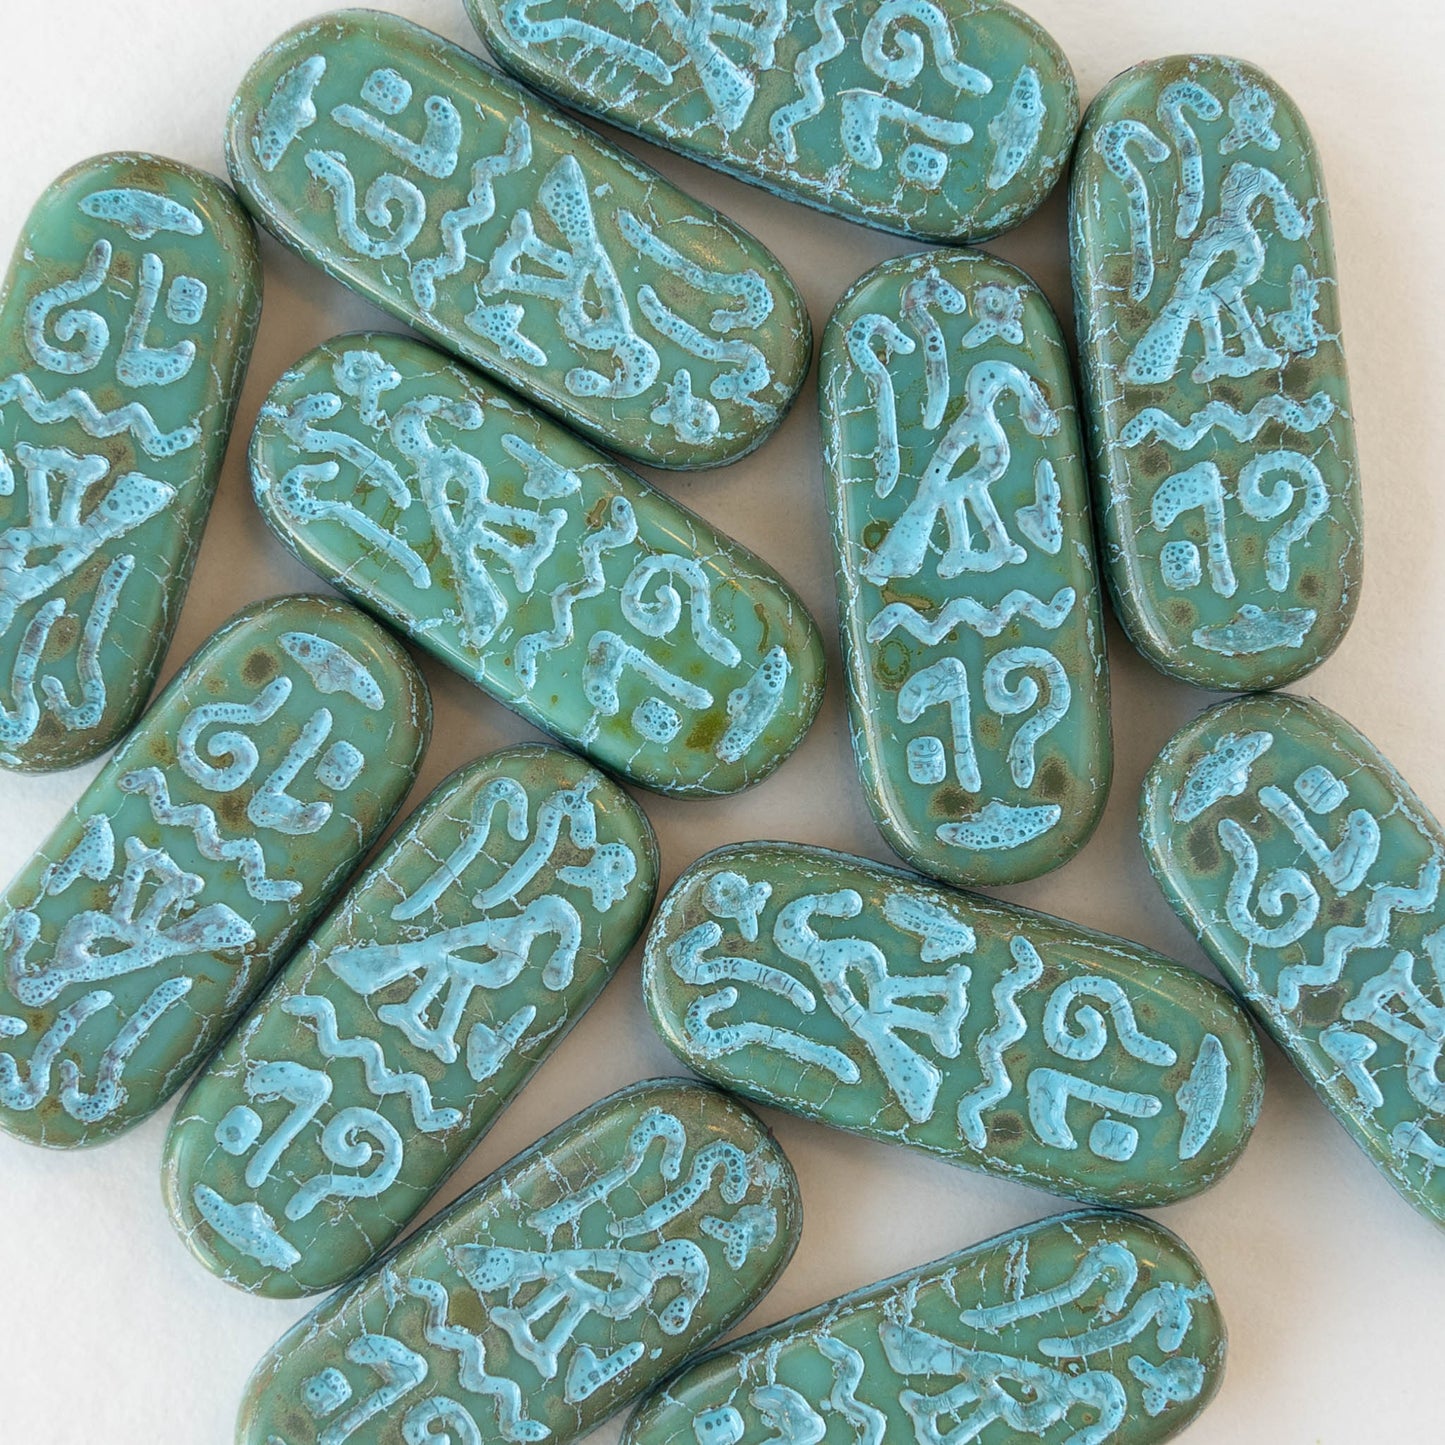 10x25mm Cartouche Beads - Turquoise with Aqua Wash  - 4